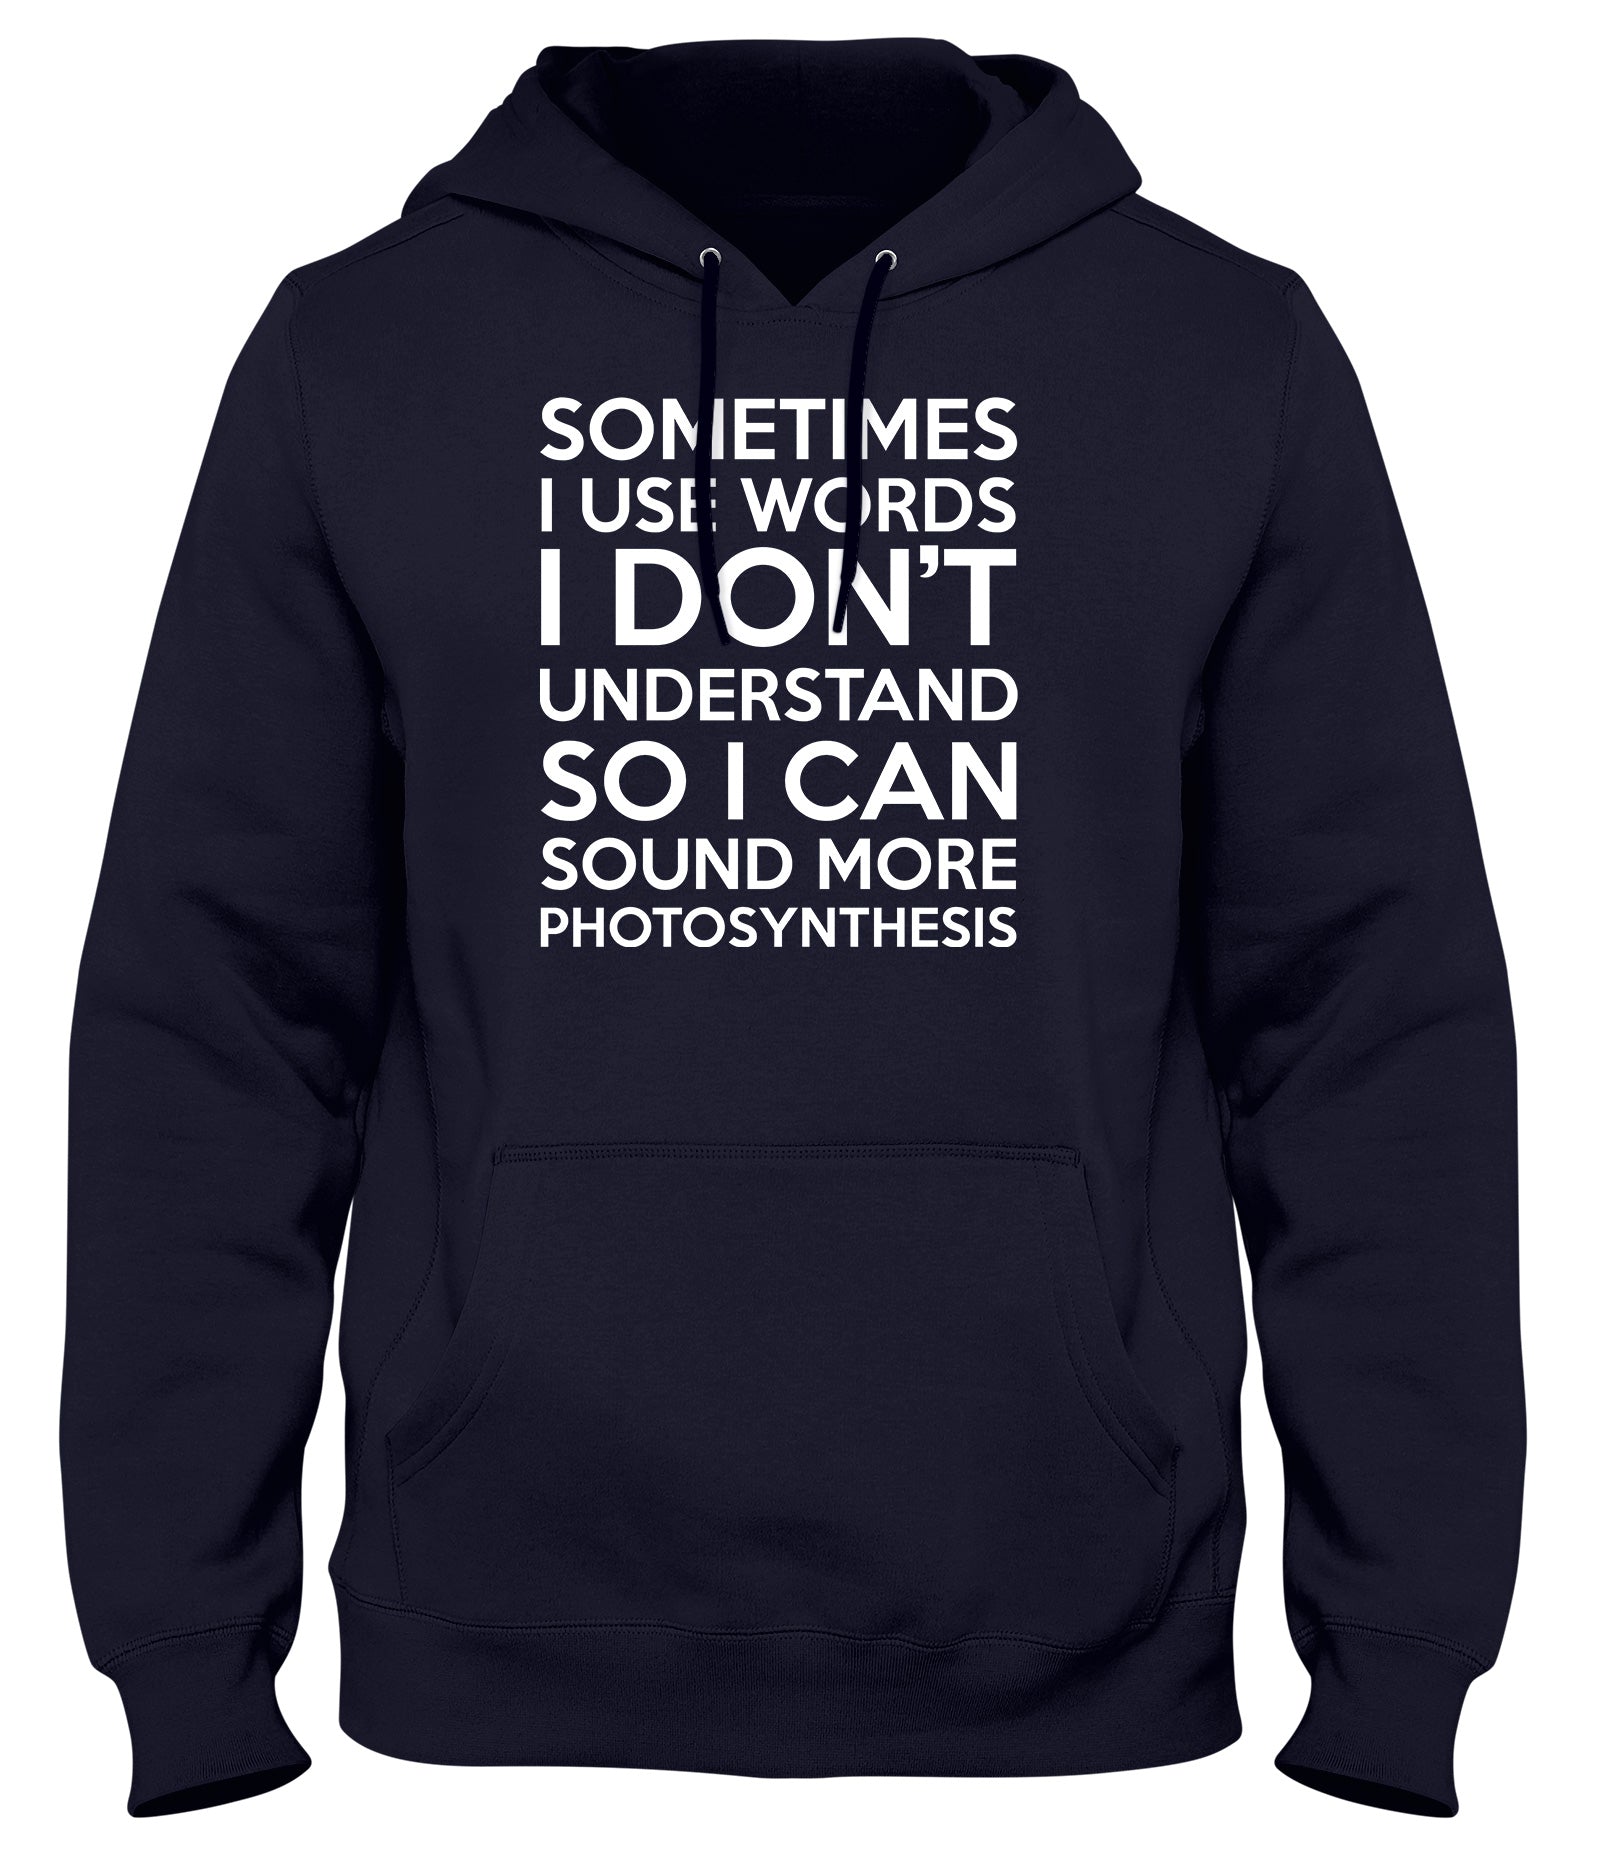 SOMETIMES I USE WORDS I DON'T UNDERSTAND MENS LADIES WOMENS UNISEX HOODIE